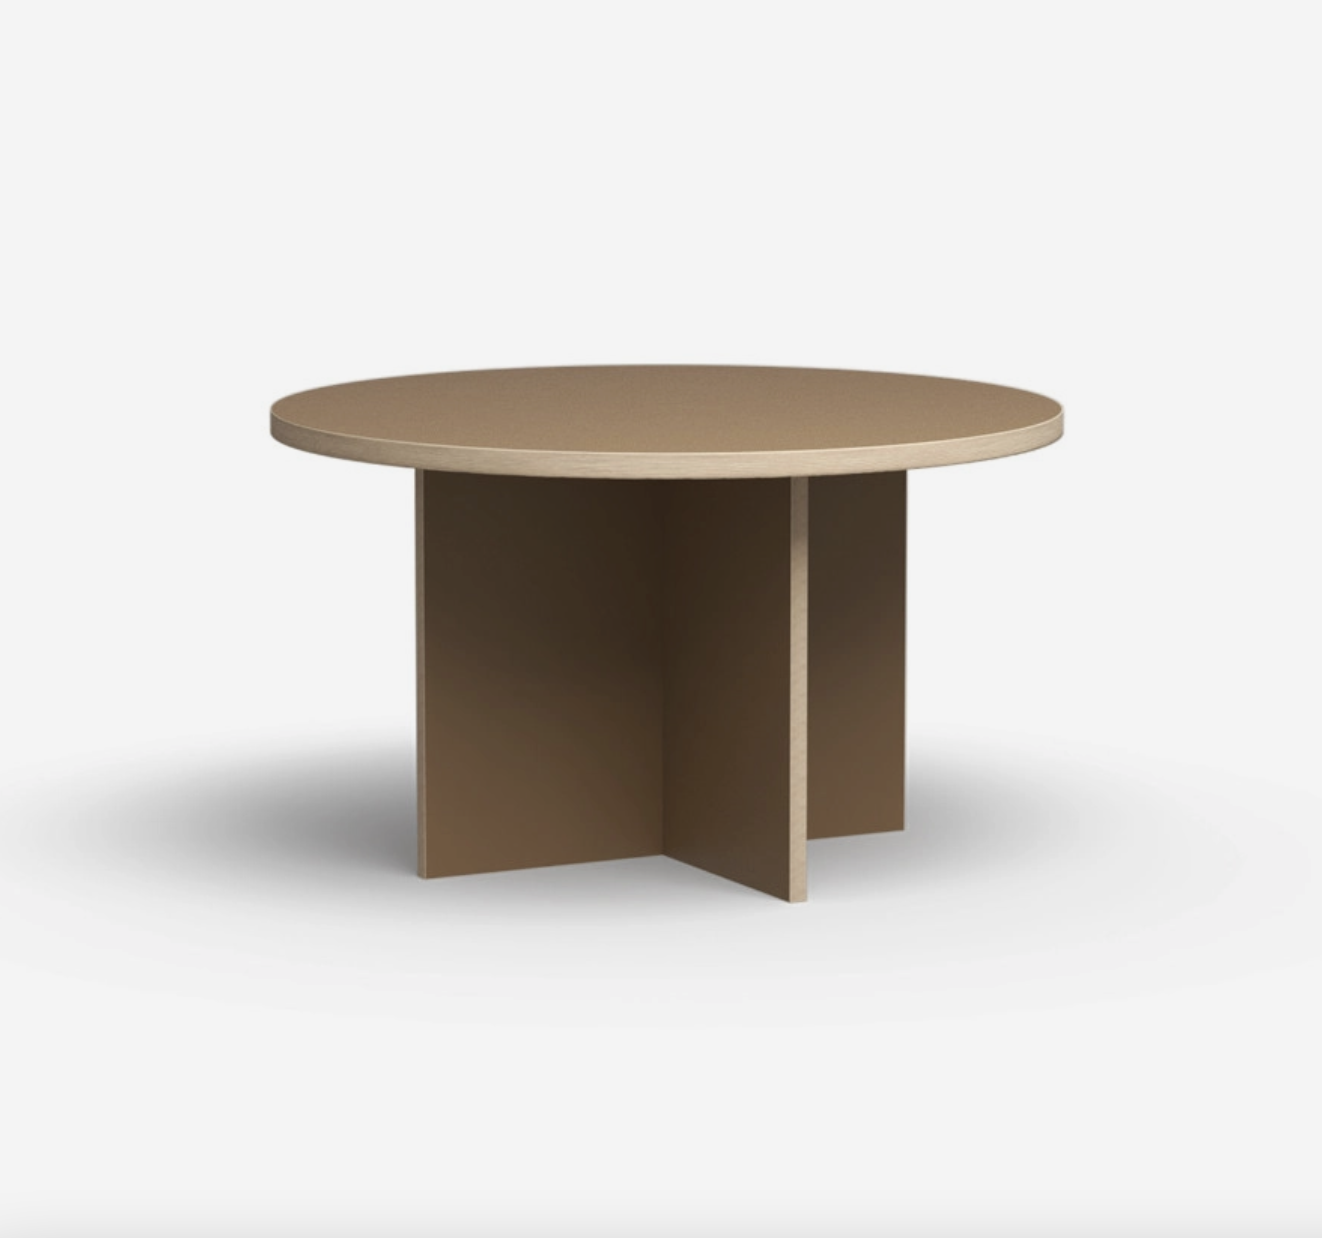 Dining table, round 130 cm